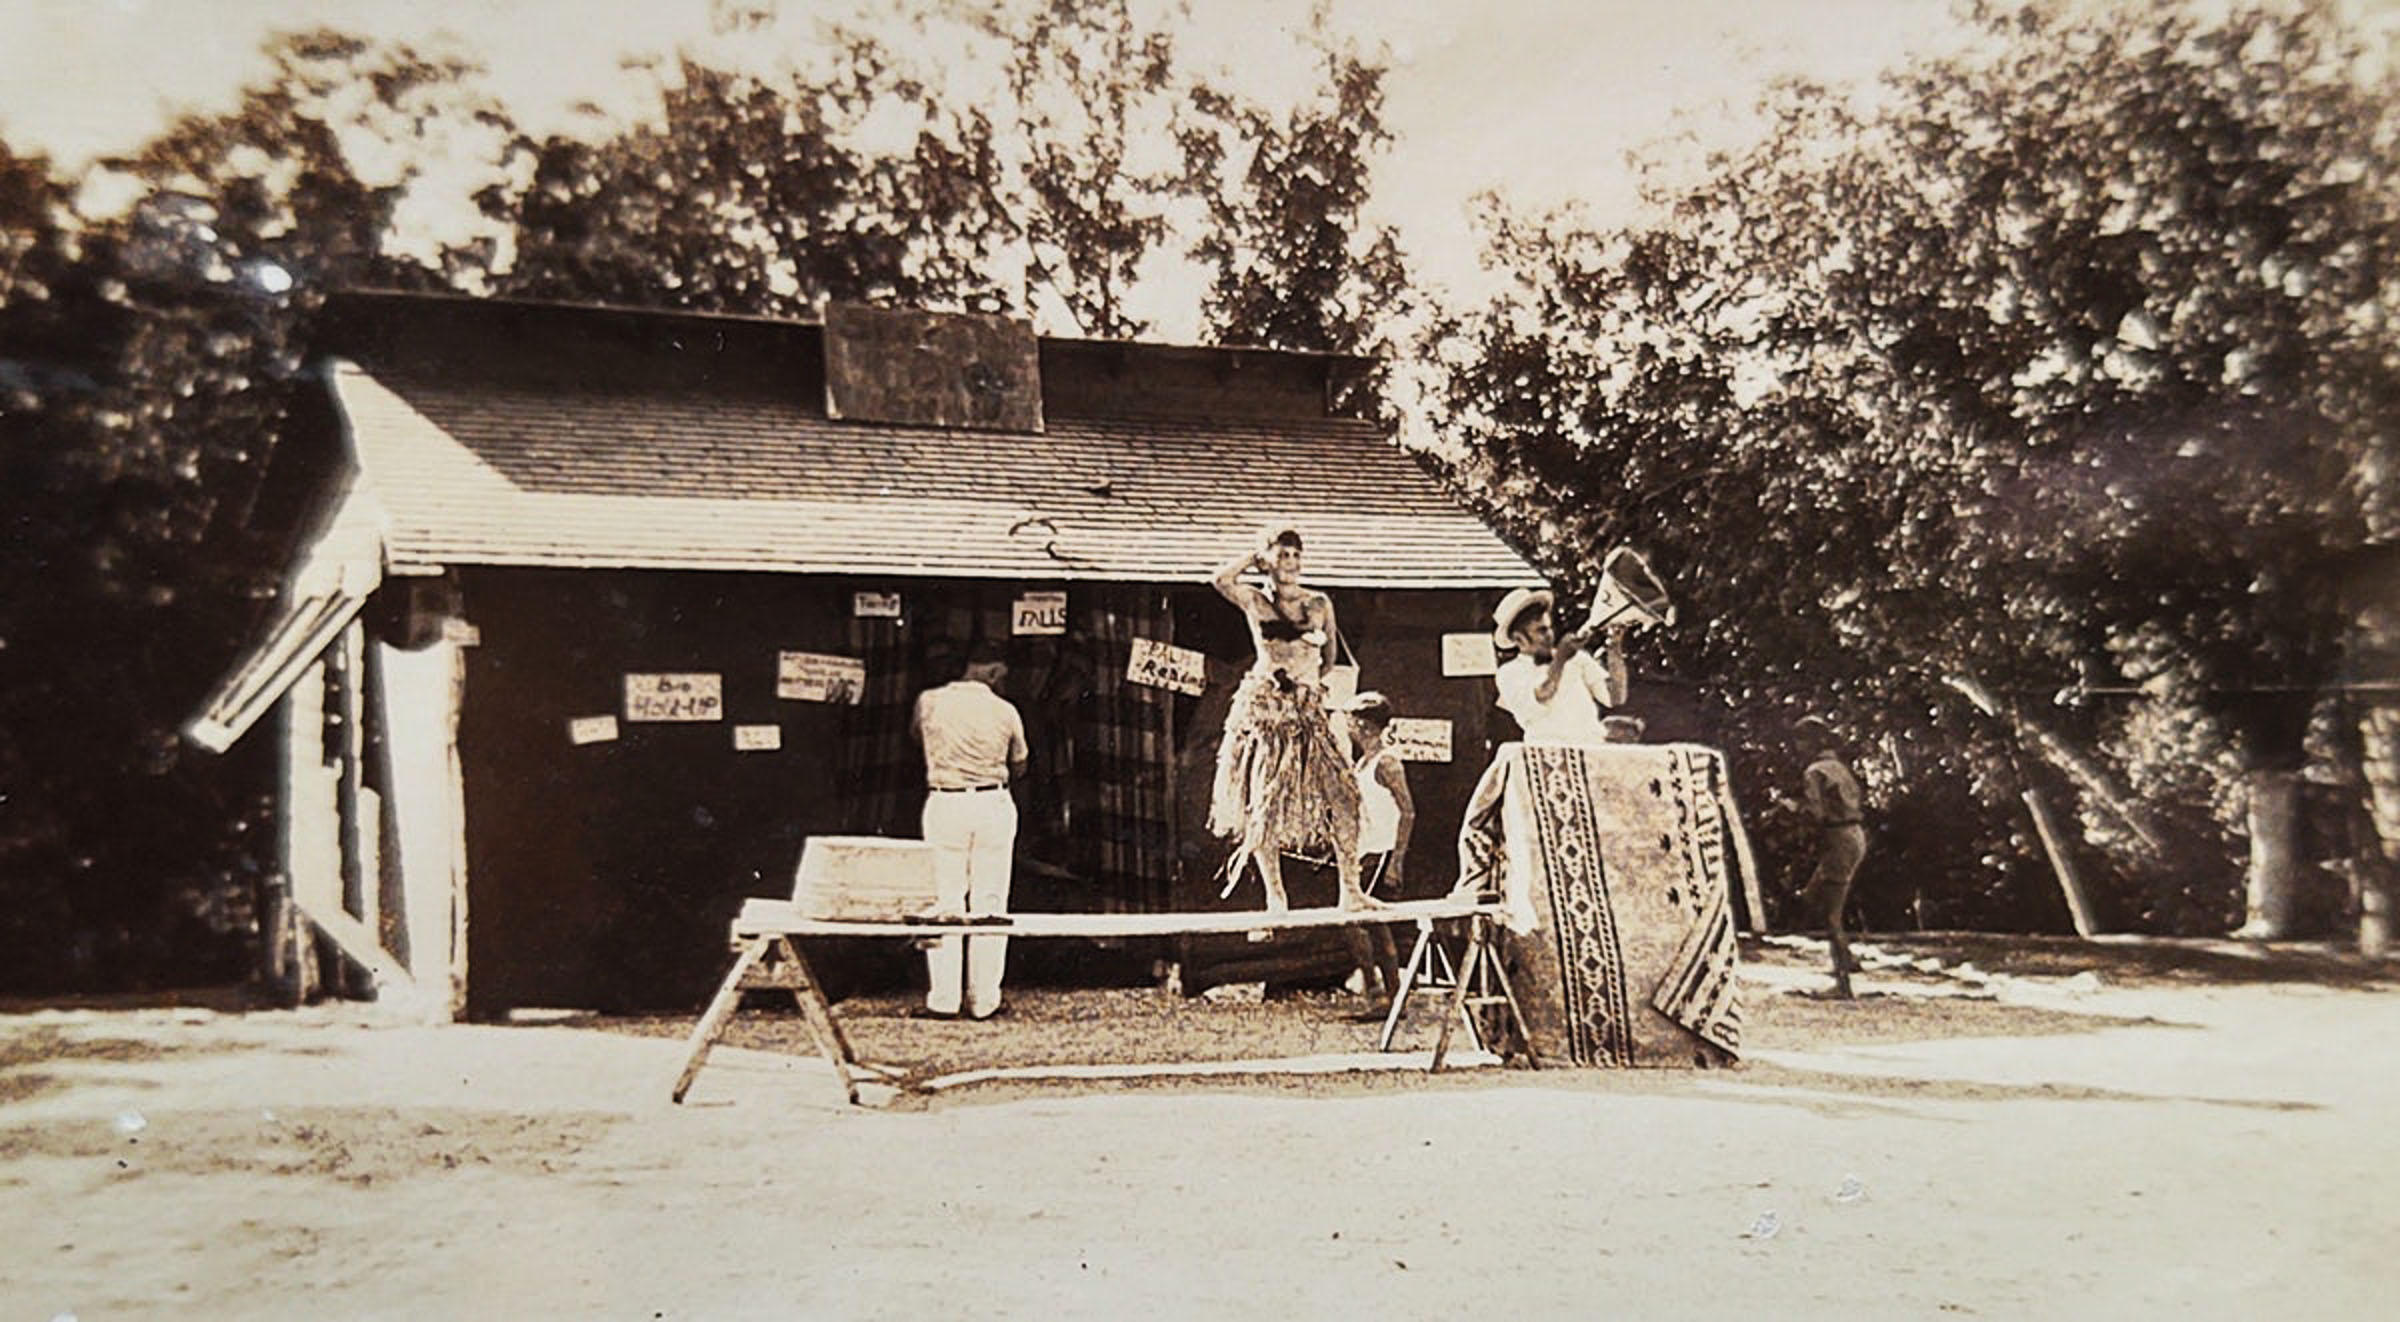 A sepia-tone image of people standing in front of an wooden building in costume